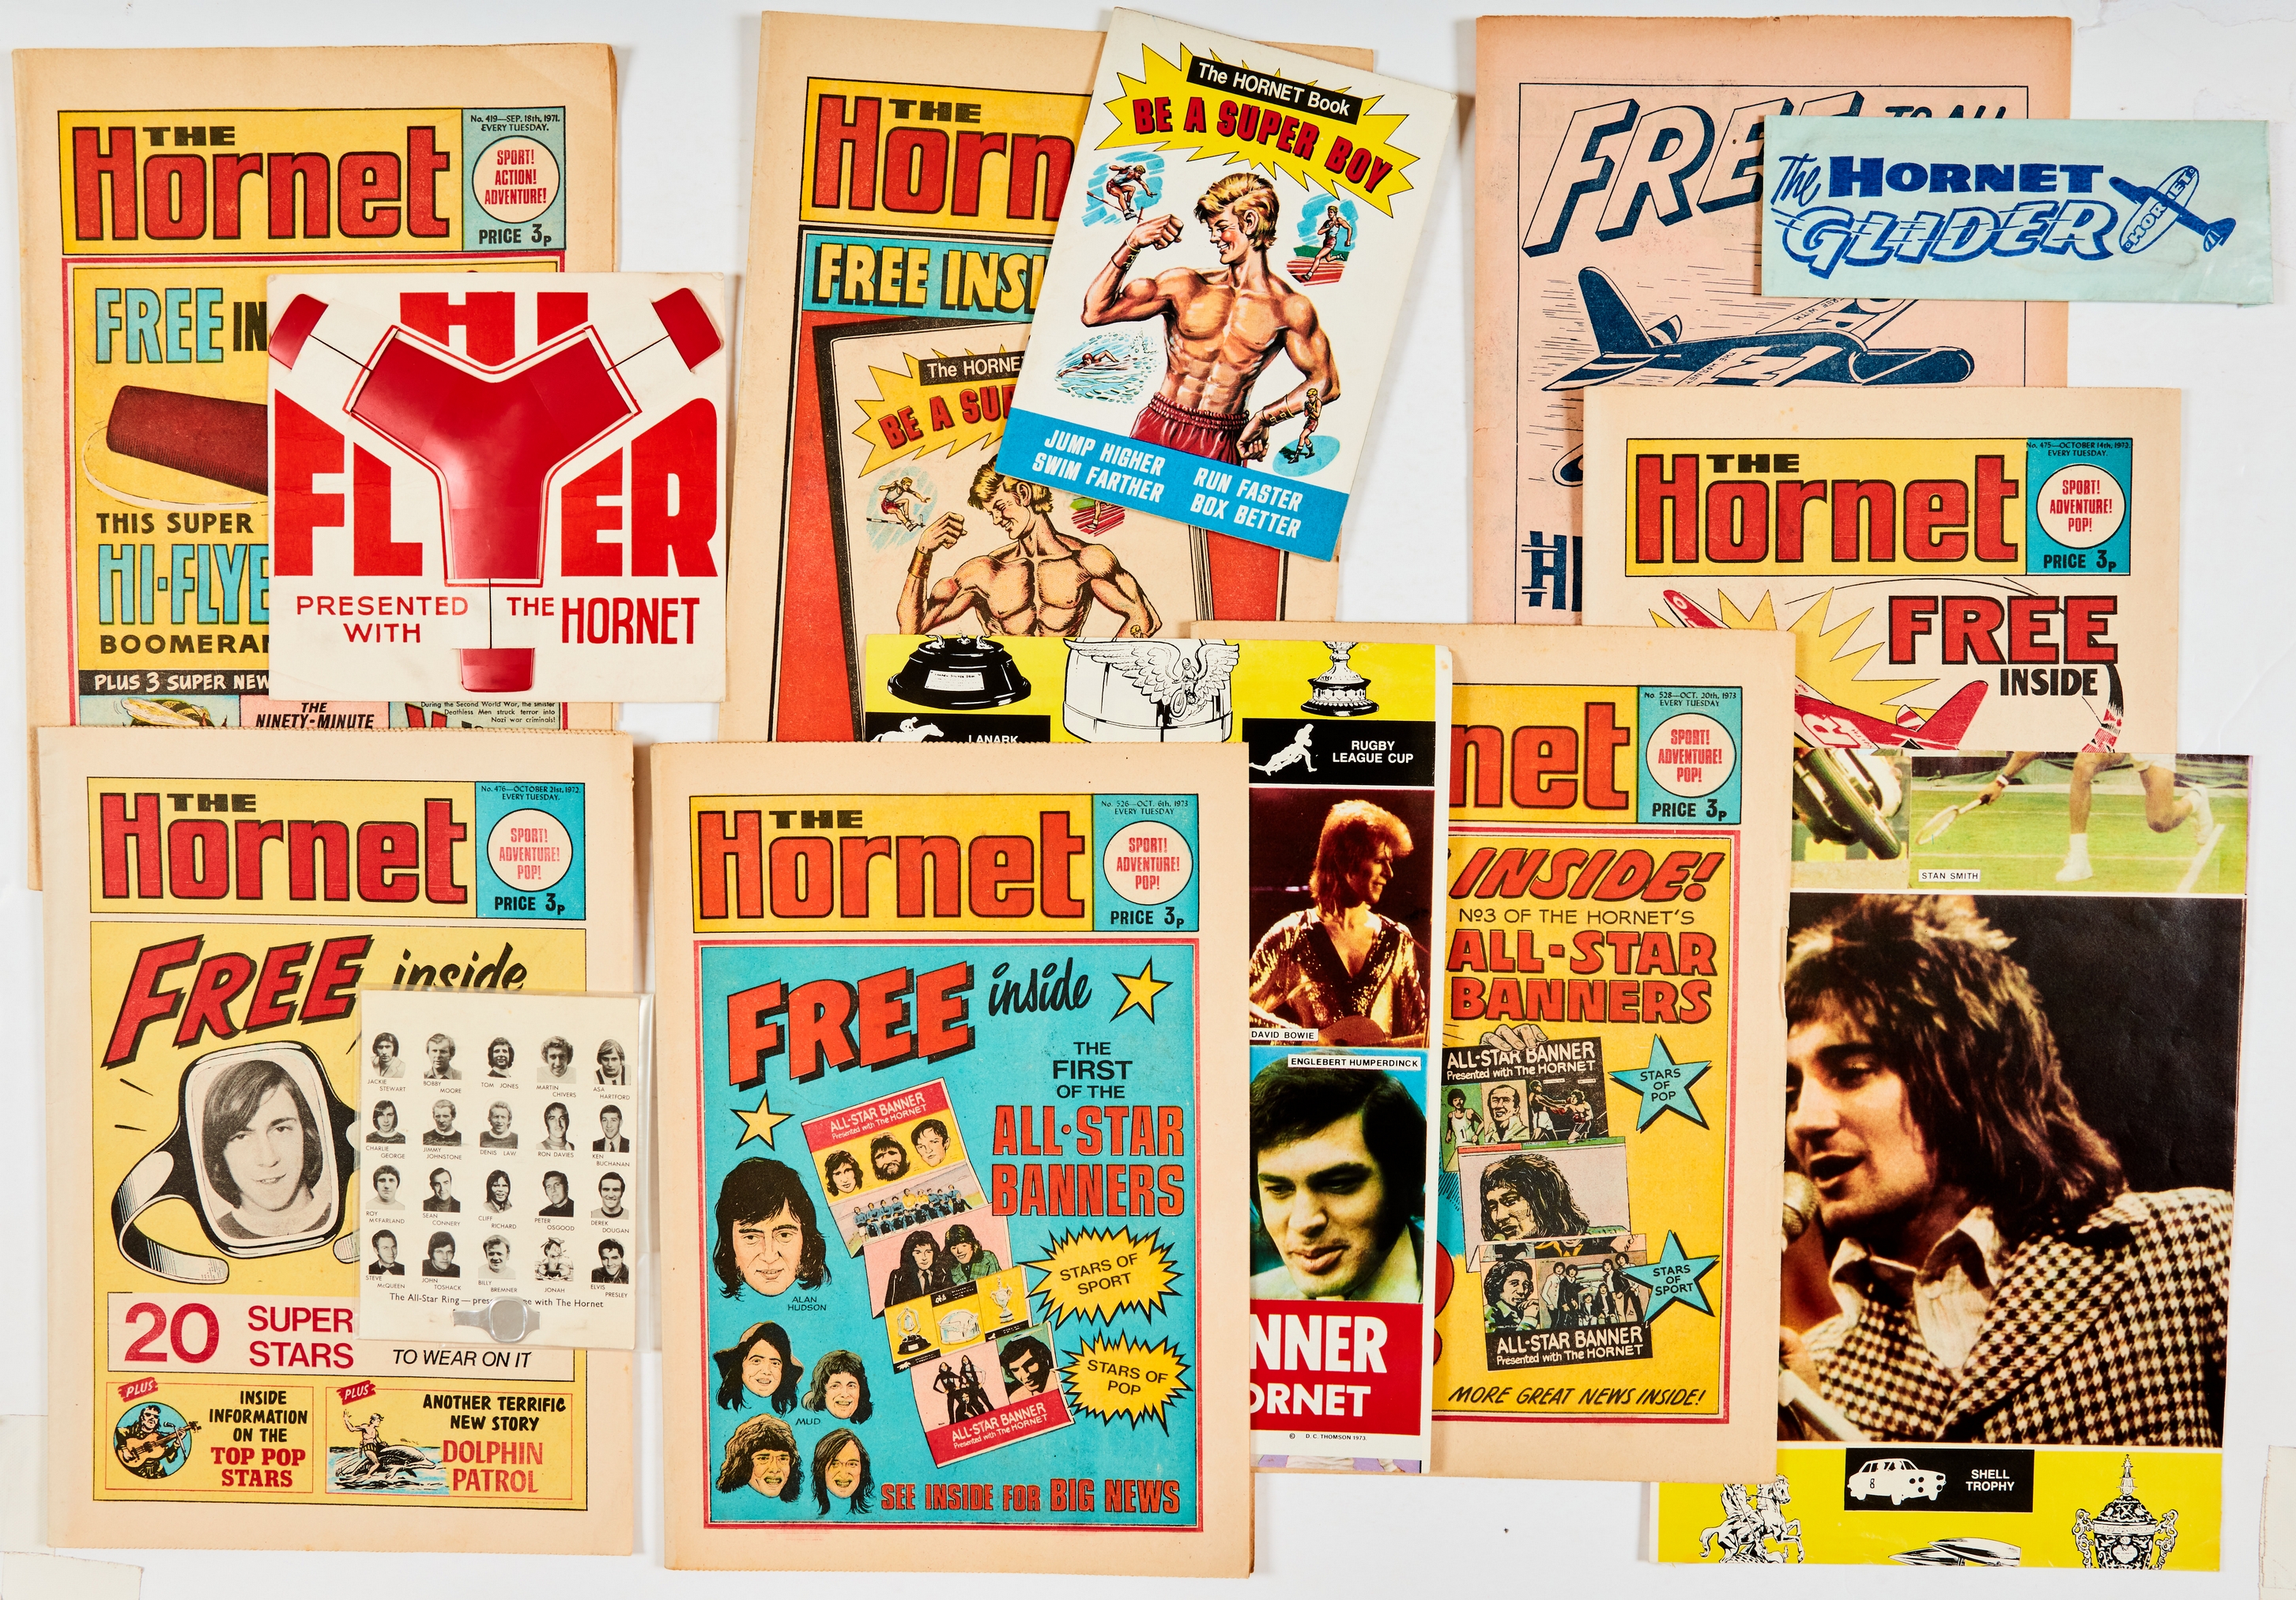 Hornet 1970s with free gifts. 419 wfg Hi-Flyer Boomerang, 420 wfg Be A Super Boy book, 475 wfg